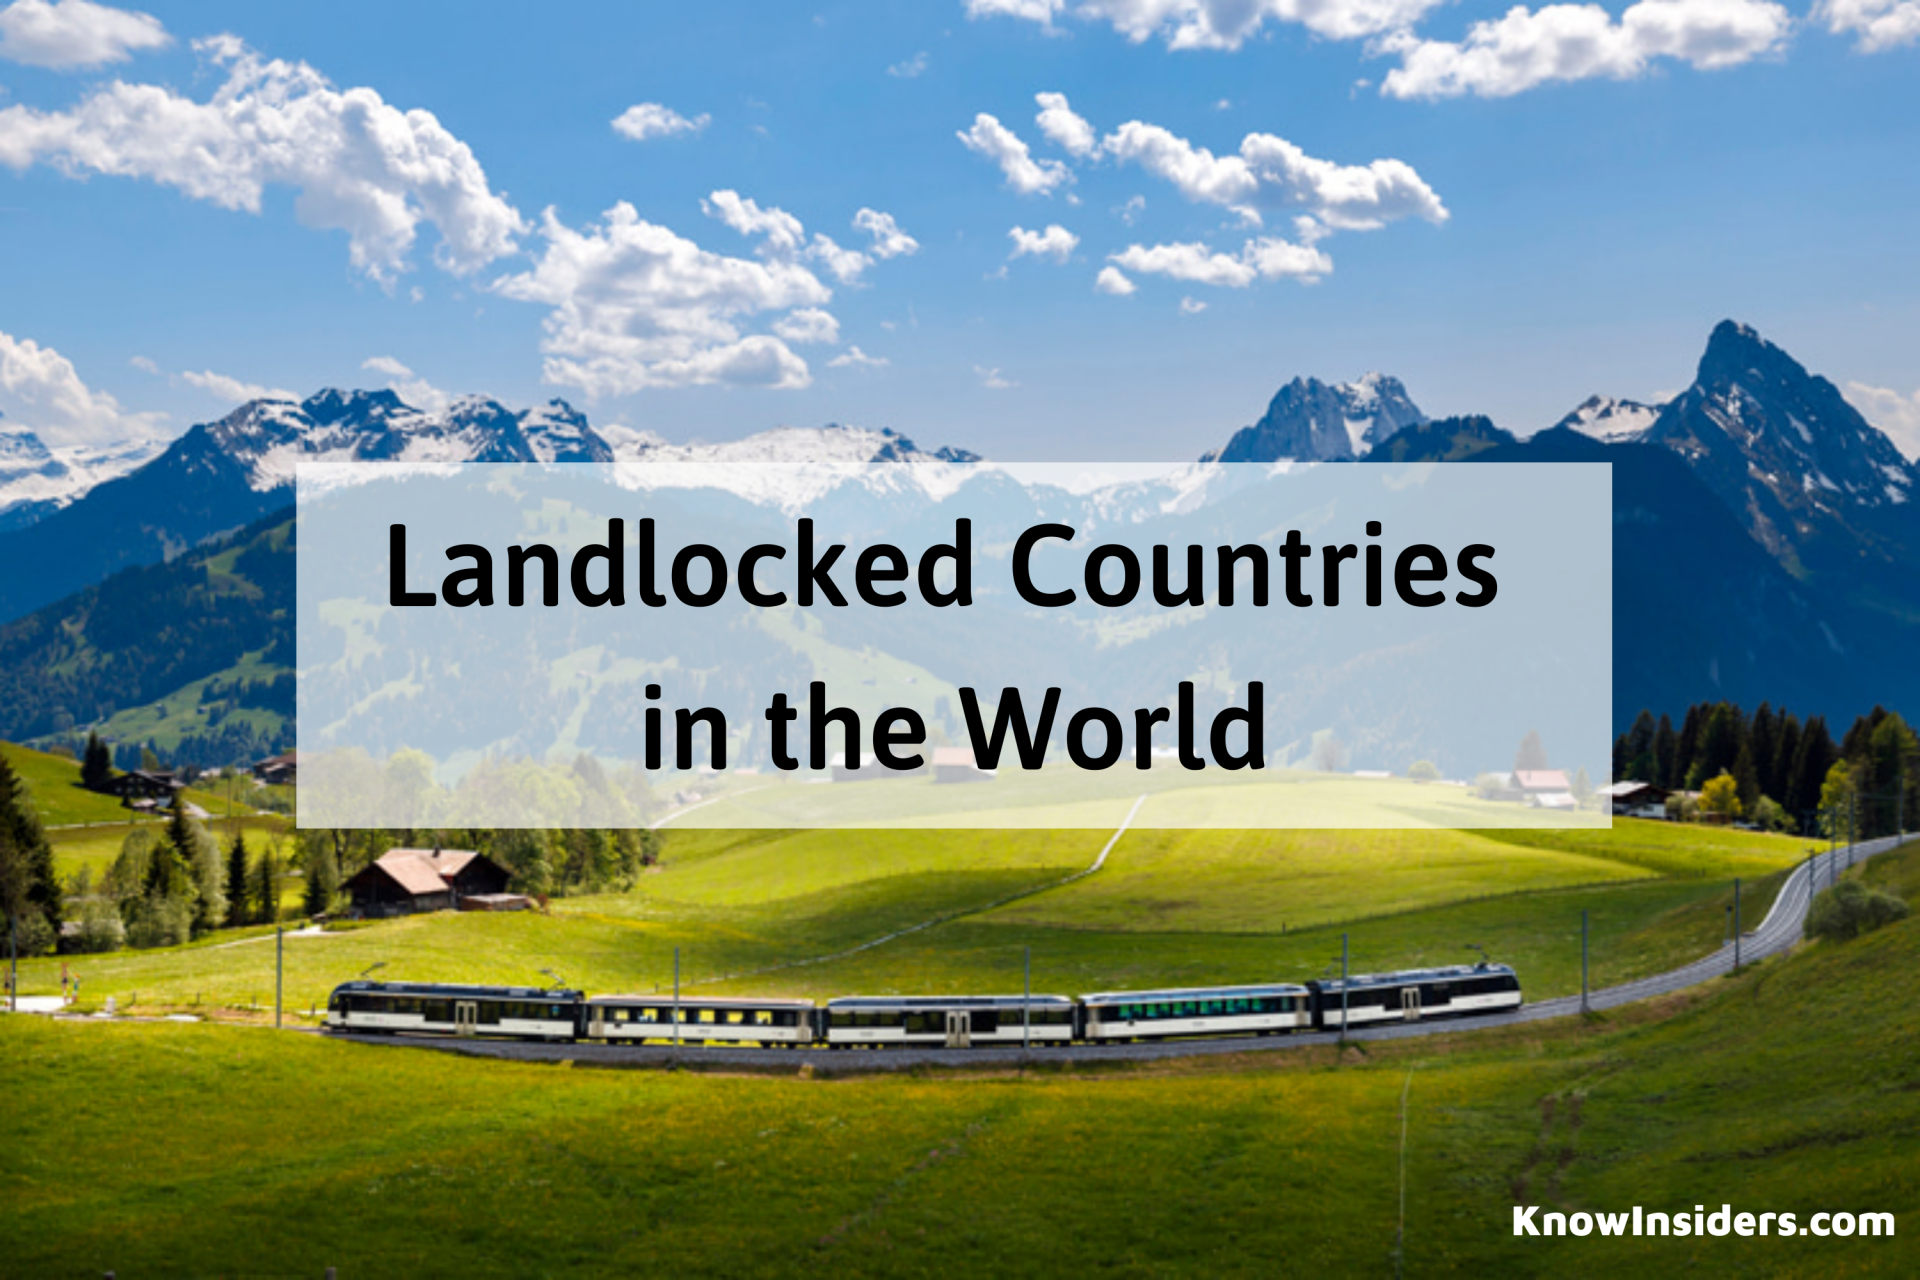 Facts About Landlocked Countries in The World